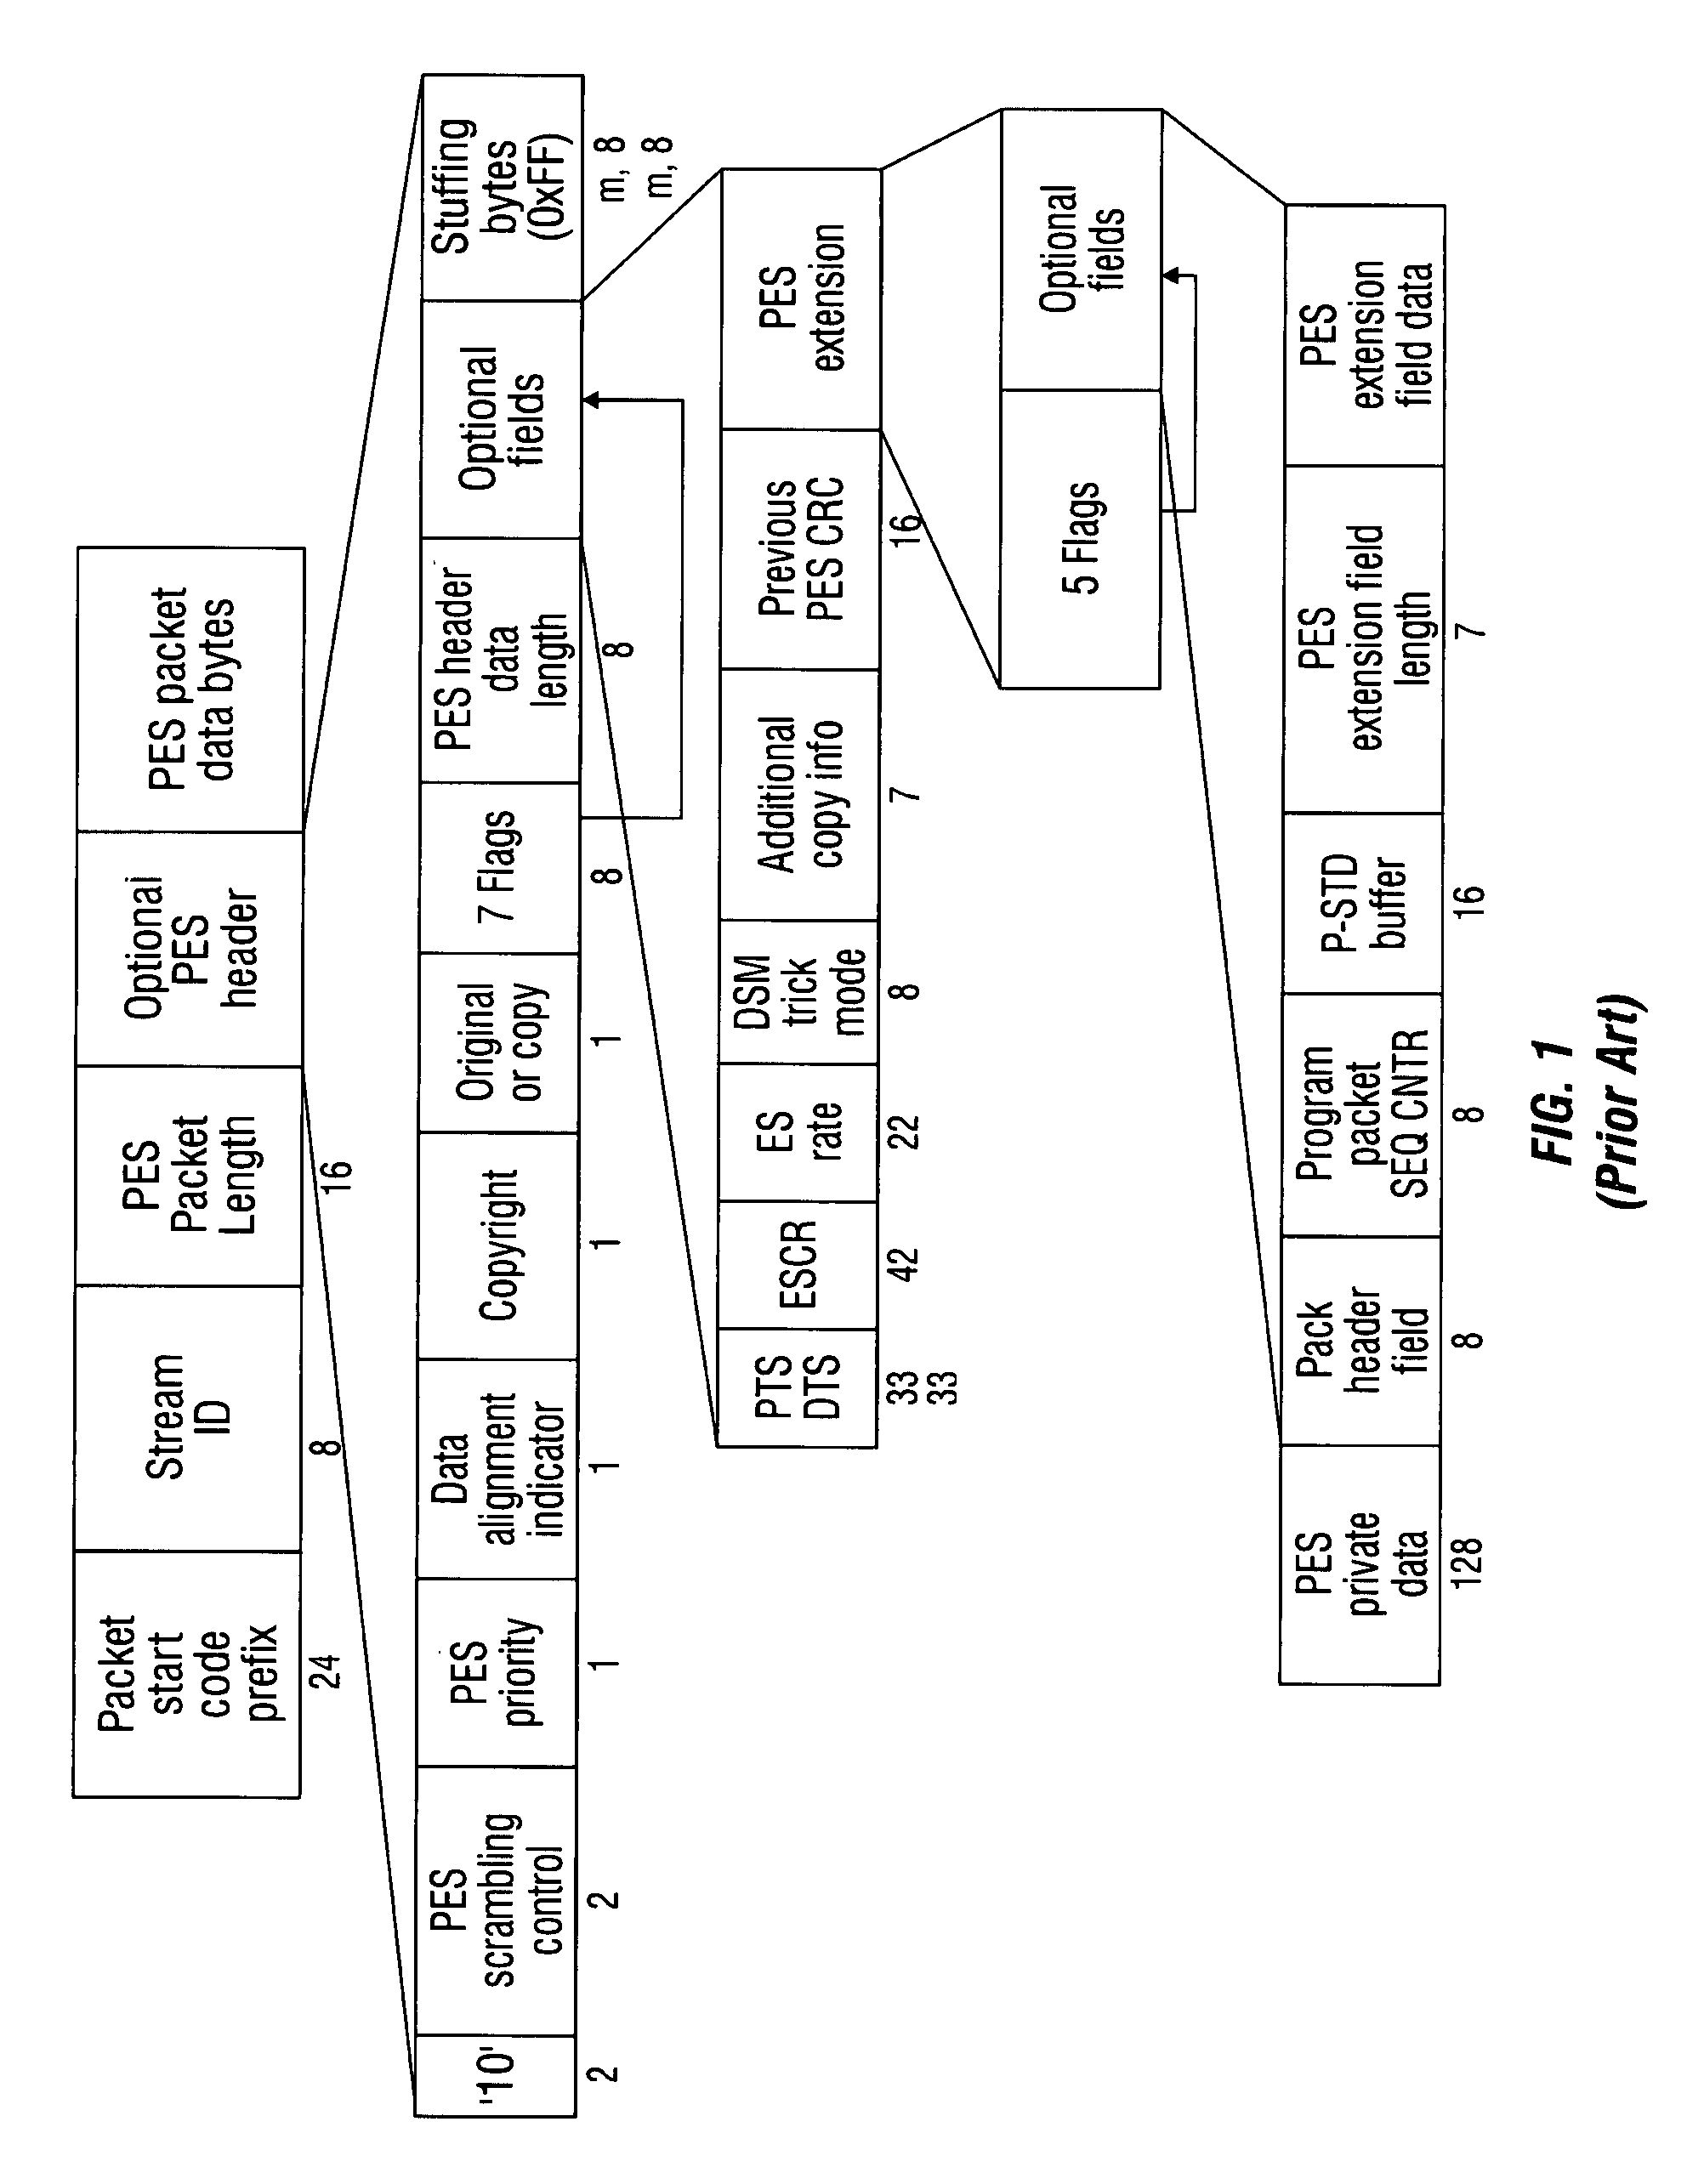 Robust MPEG-2 multiplexing system and method using an adjustable time stamp